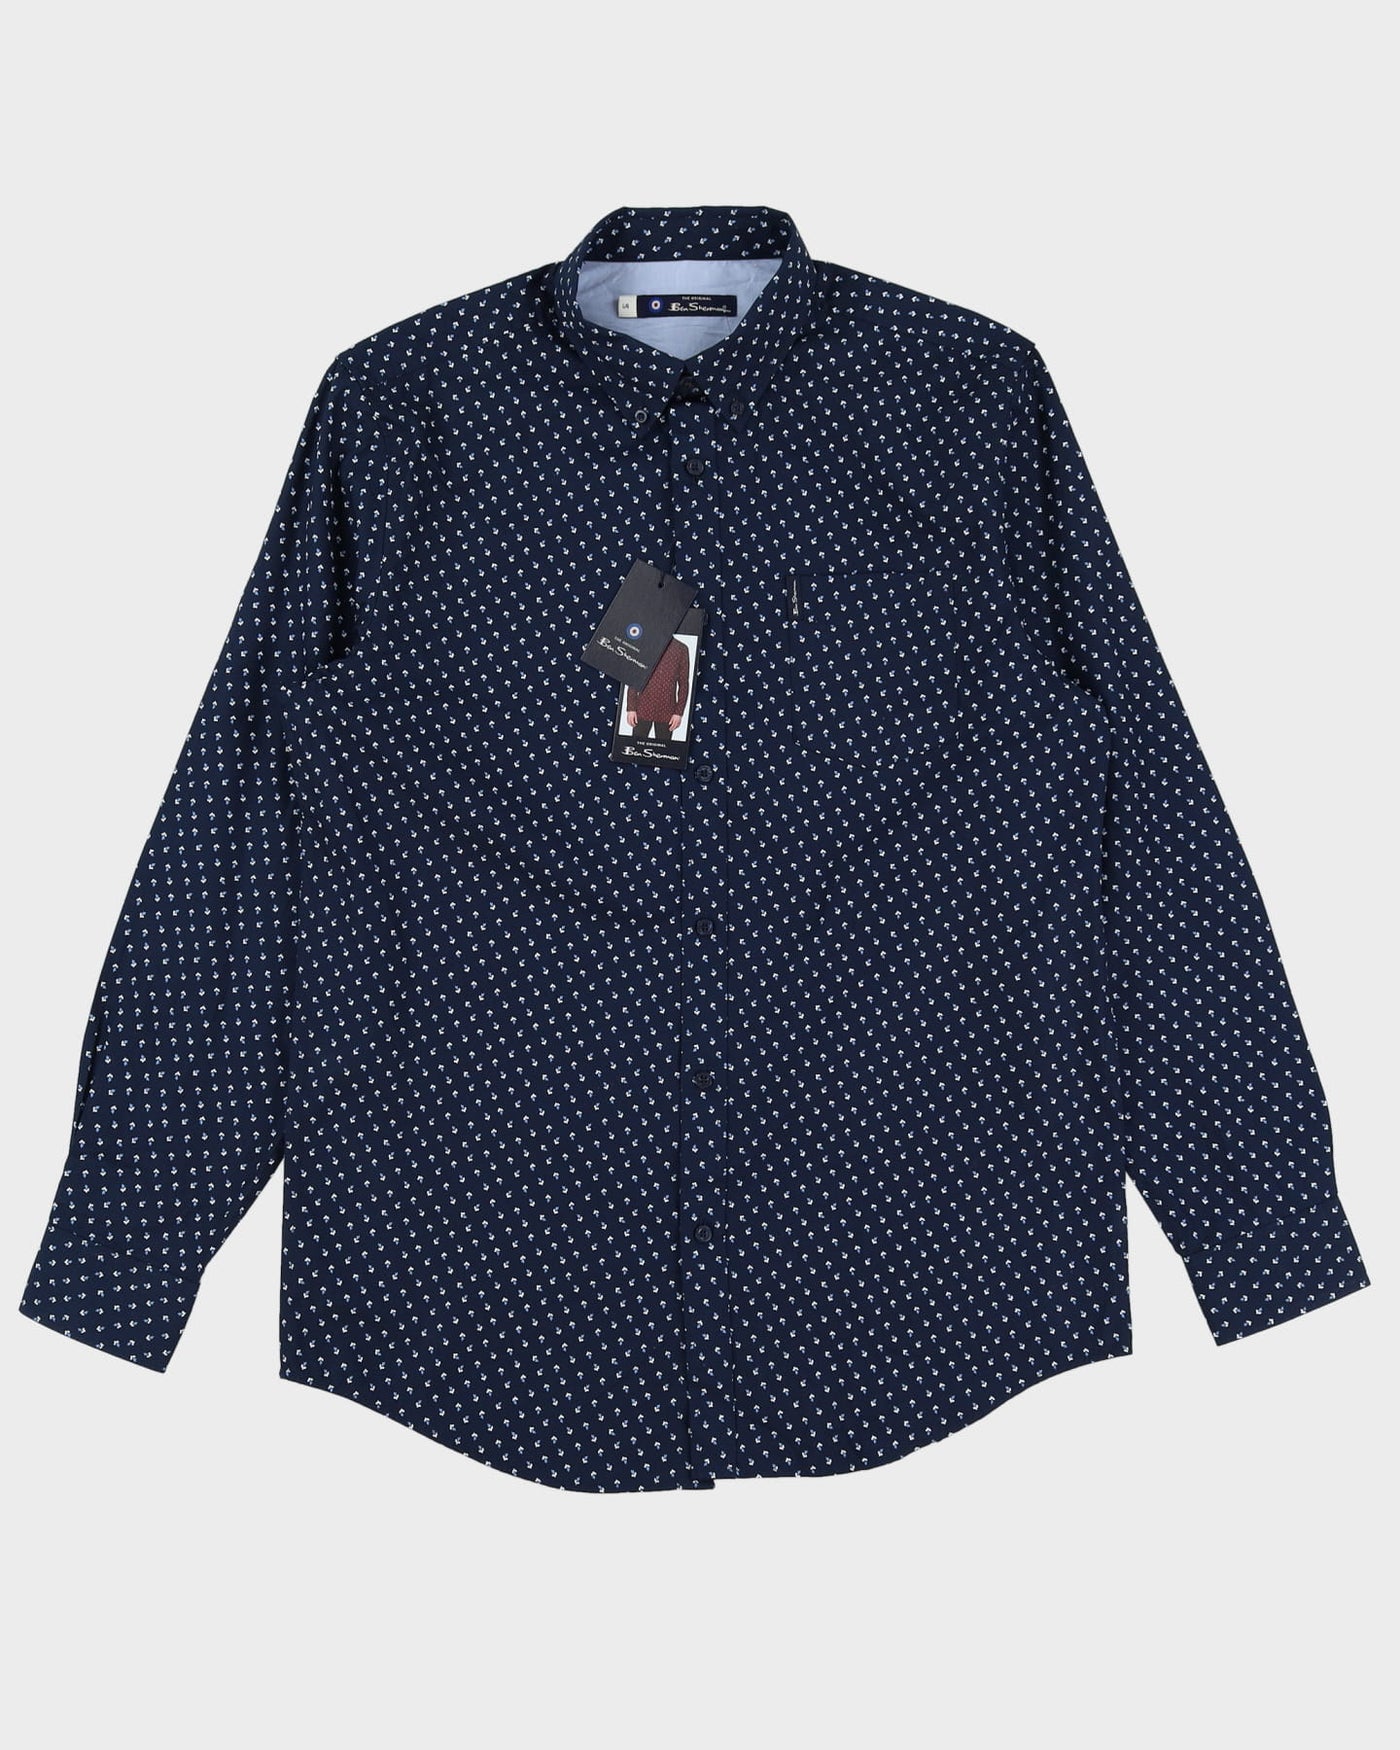 Deadstock With Tags Navy Ben Sherman Patterned Button Up Long Sleeve Shirt - L